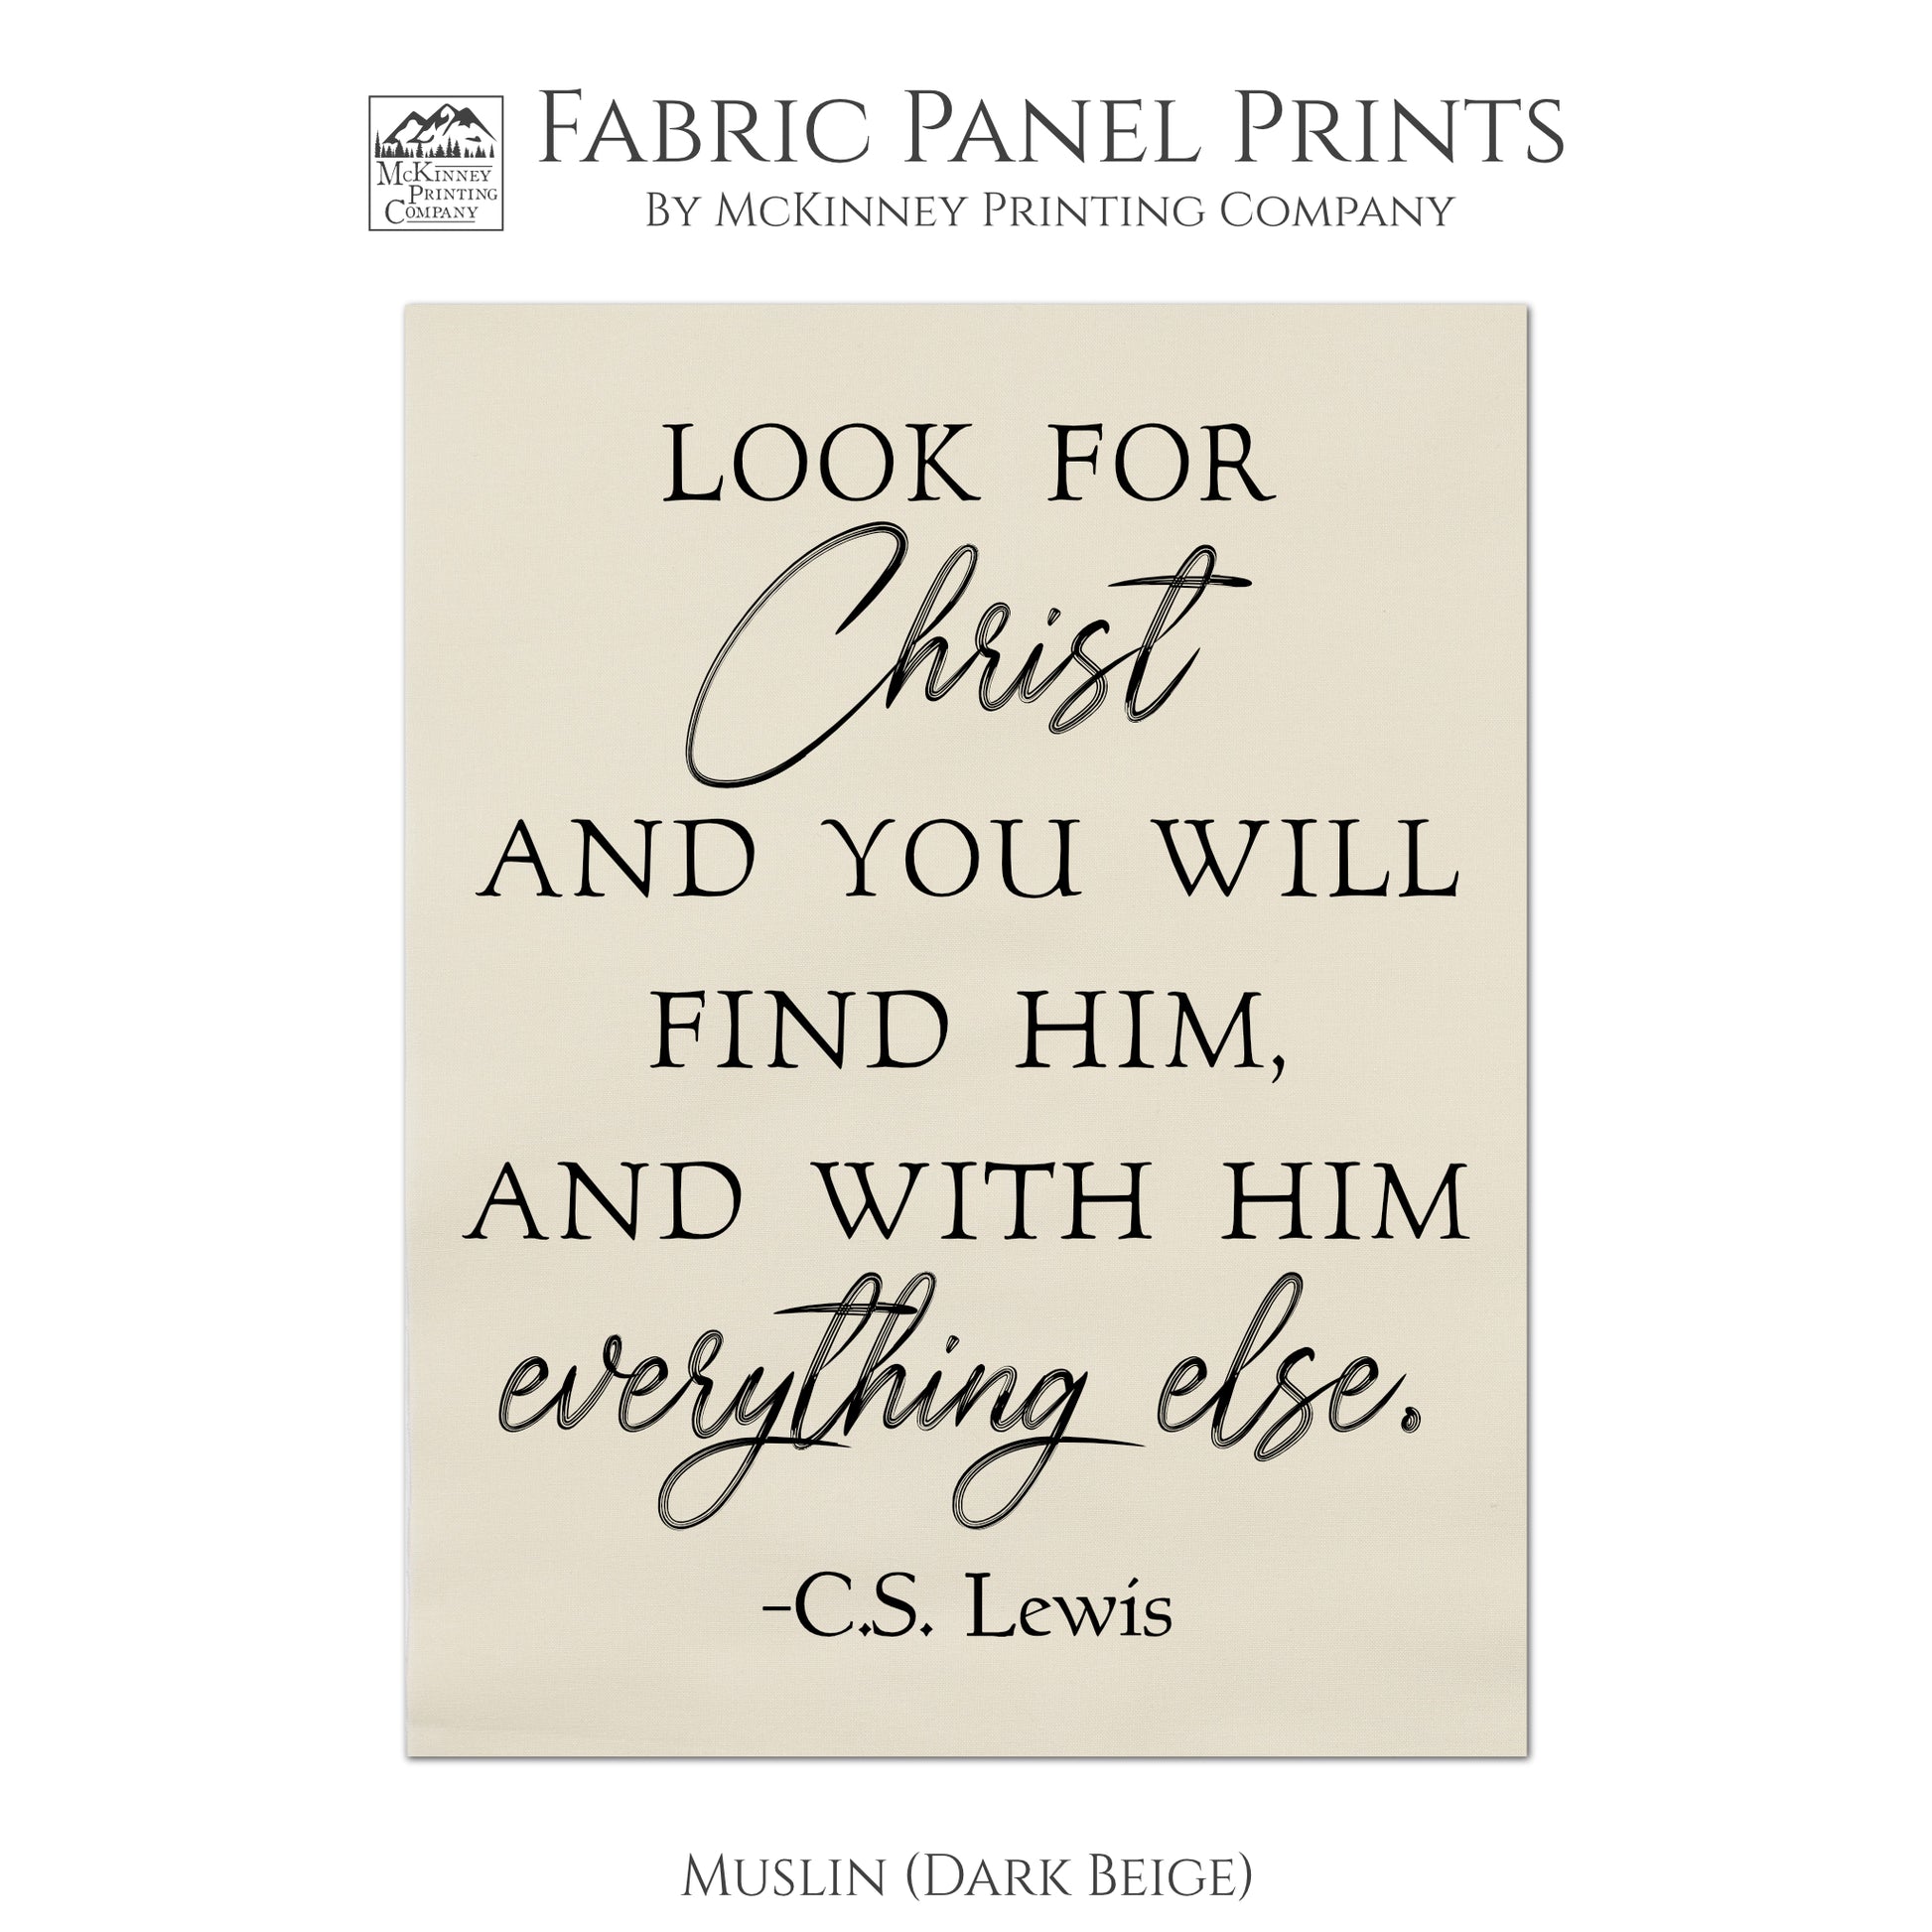 Look for Christ and you will find him, and with him everything else - CS Lewis Print, Fabric Panel, Wall Art, Quilt, Sewing